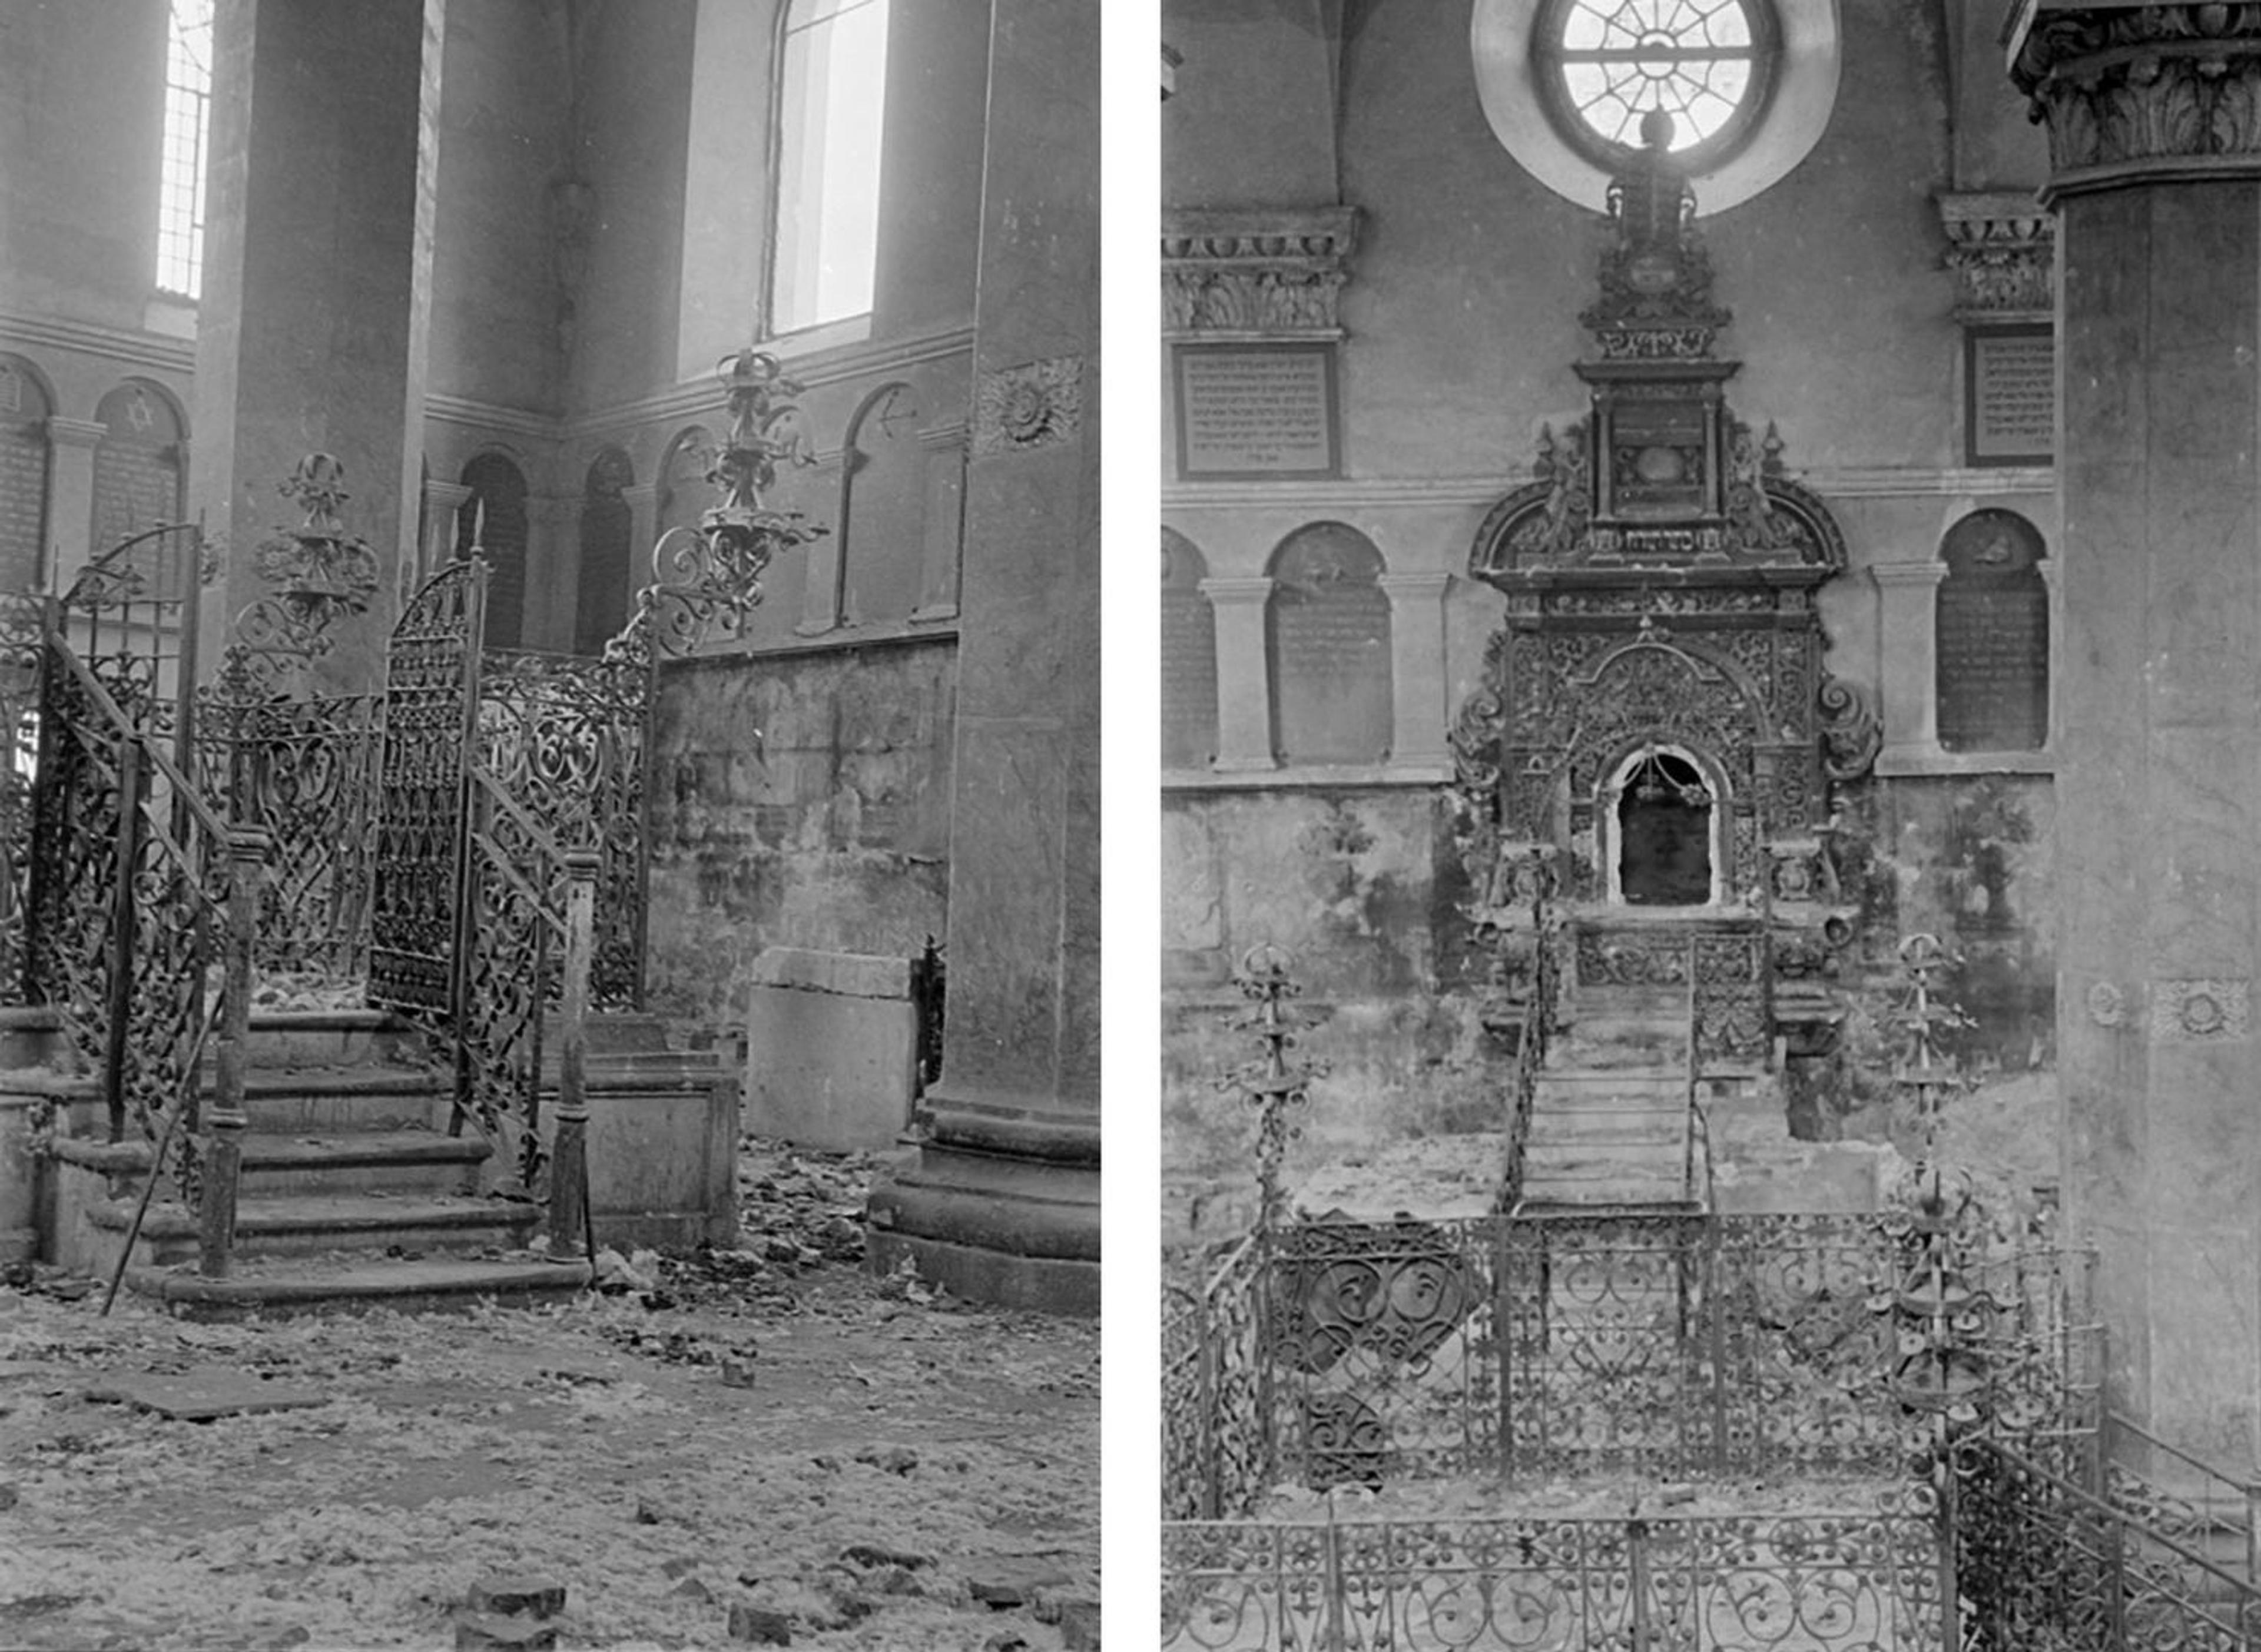 Two photos of a destroyed synagogue